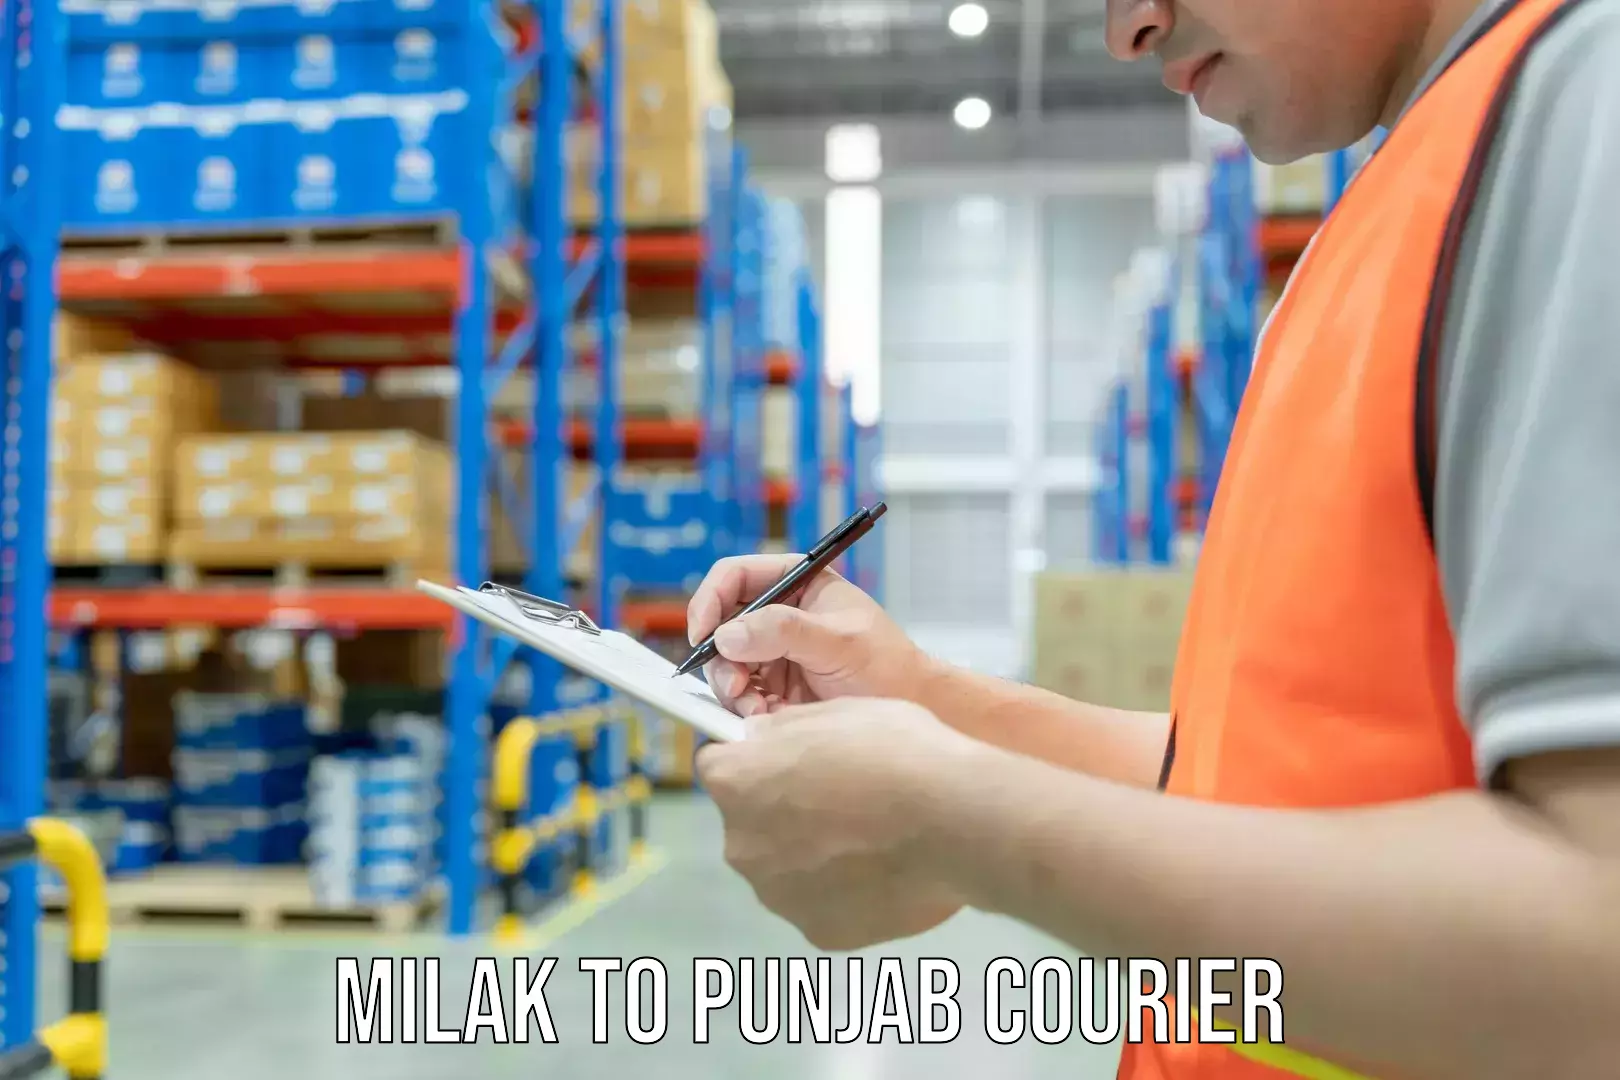 Dependable moving services Milak to Punjab